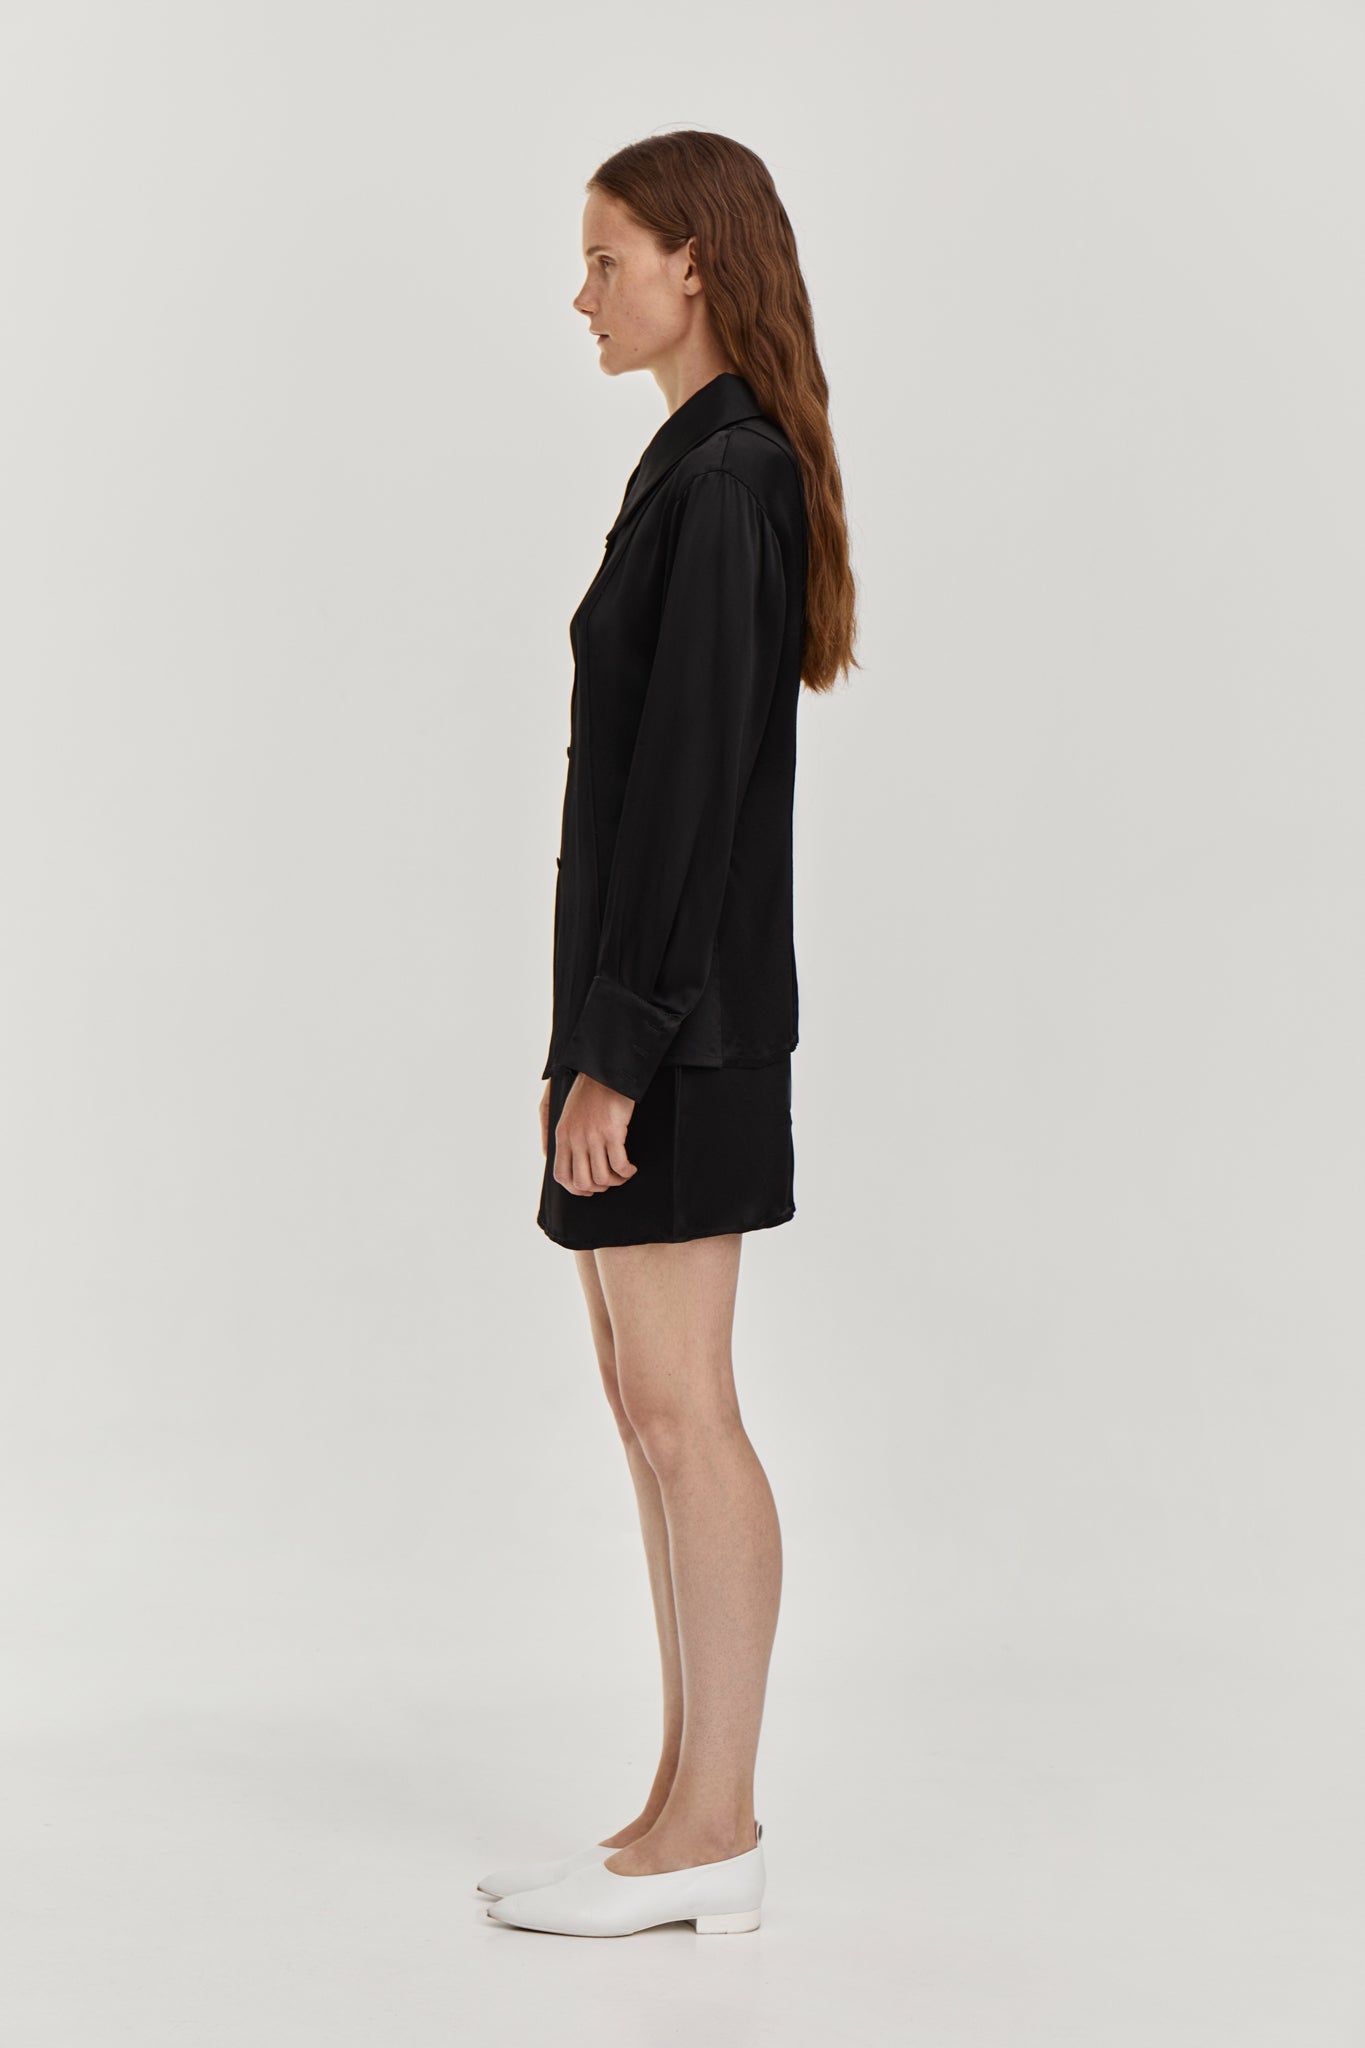 Viscose suit shirt and low-waist silky skirt in black color from FORMA.